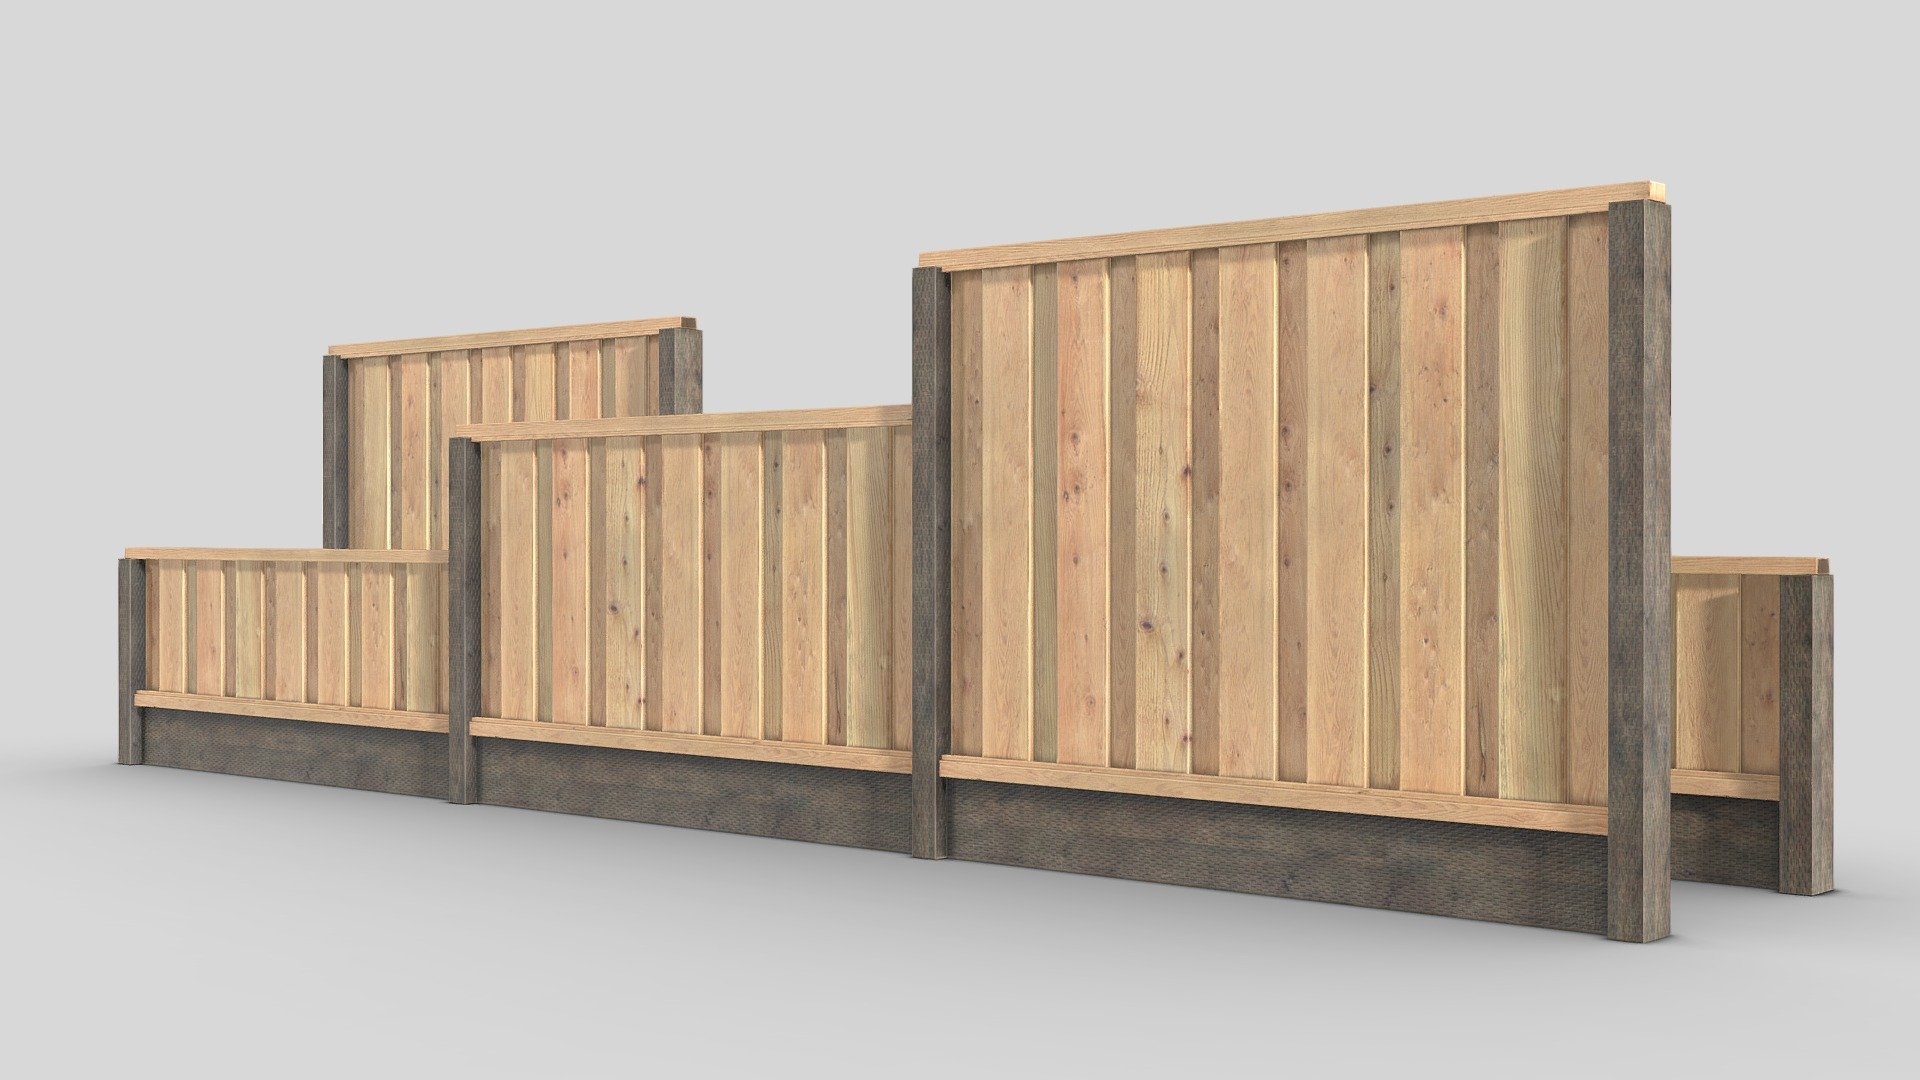 Please No clipping 

American Wood Fence Pack with BPR textures 8192x8192

woodFence_Base_Color
woodFence_Height
woodFence_Metallic
woodFence_Mixed_AO
woodFence_Normal_OpenGL - American Wooden Fence Pack - Buy Royalty Free 3D model by specifickarma 3d model